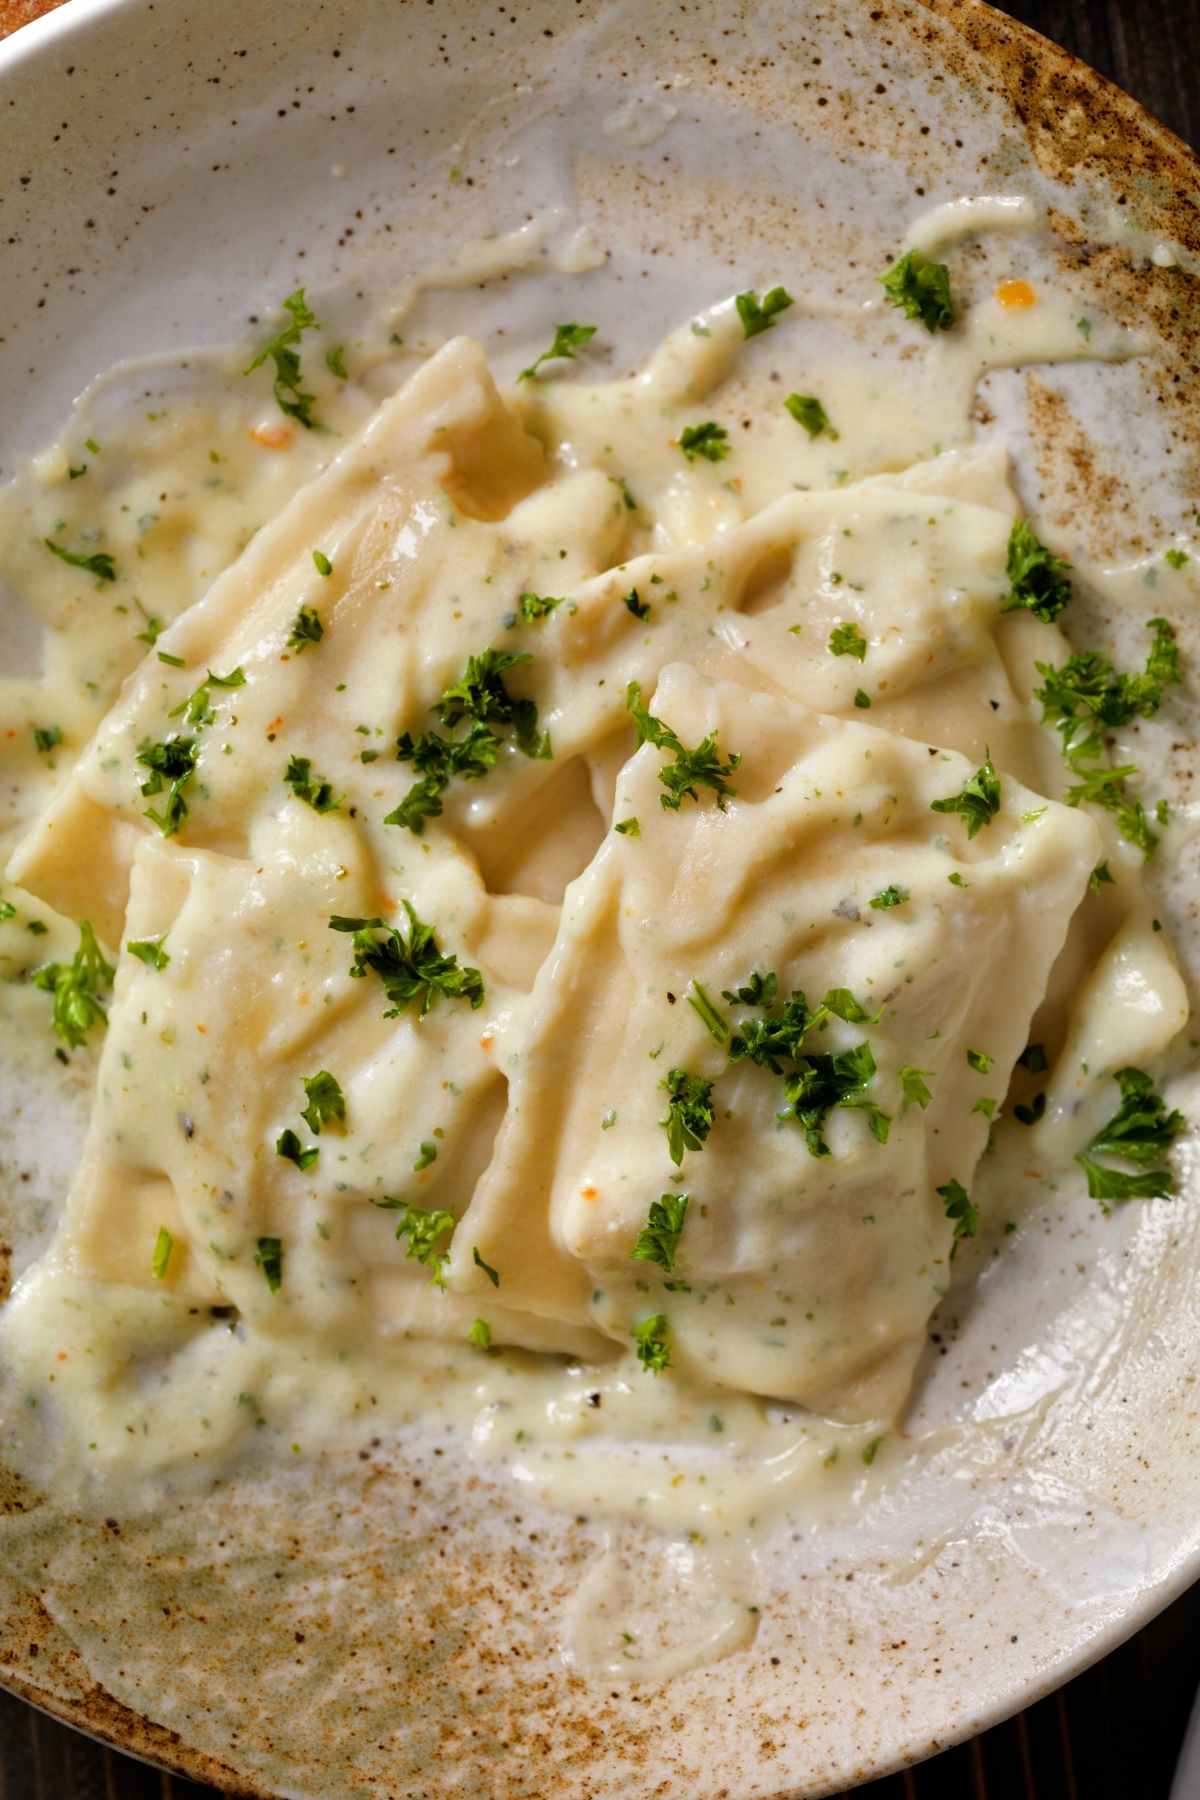 Alfredo sauce is delicious served with pasta. It’s easy to make at home, and this recipe uses whole milk instead of cream.